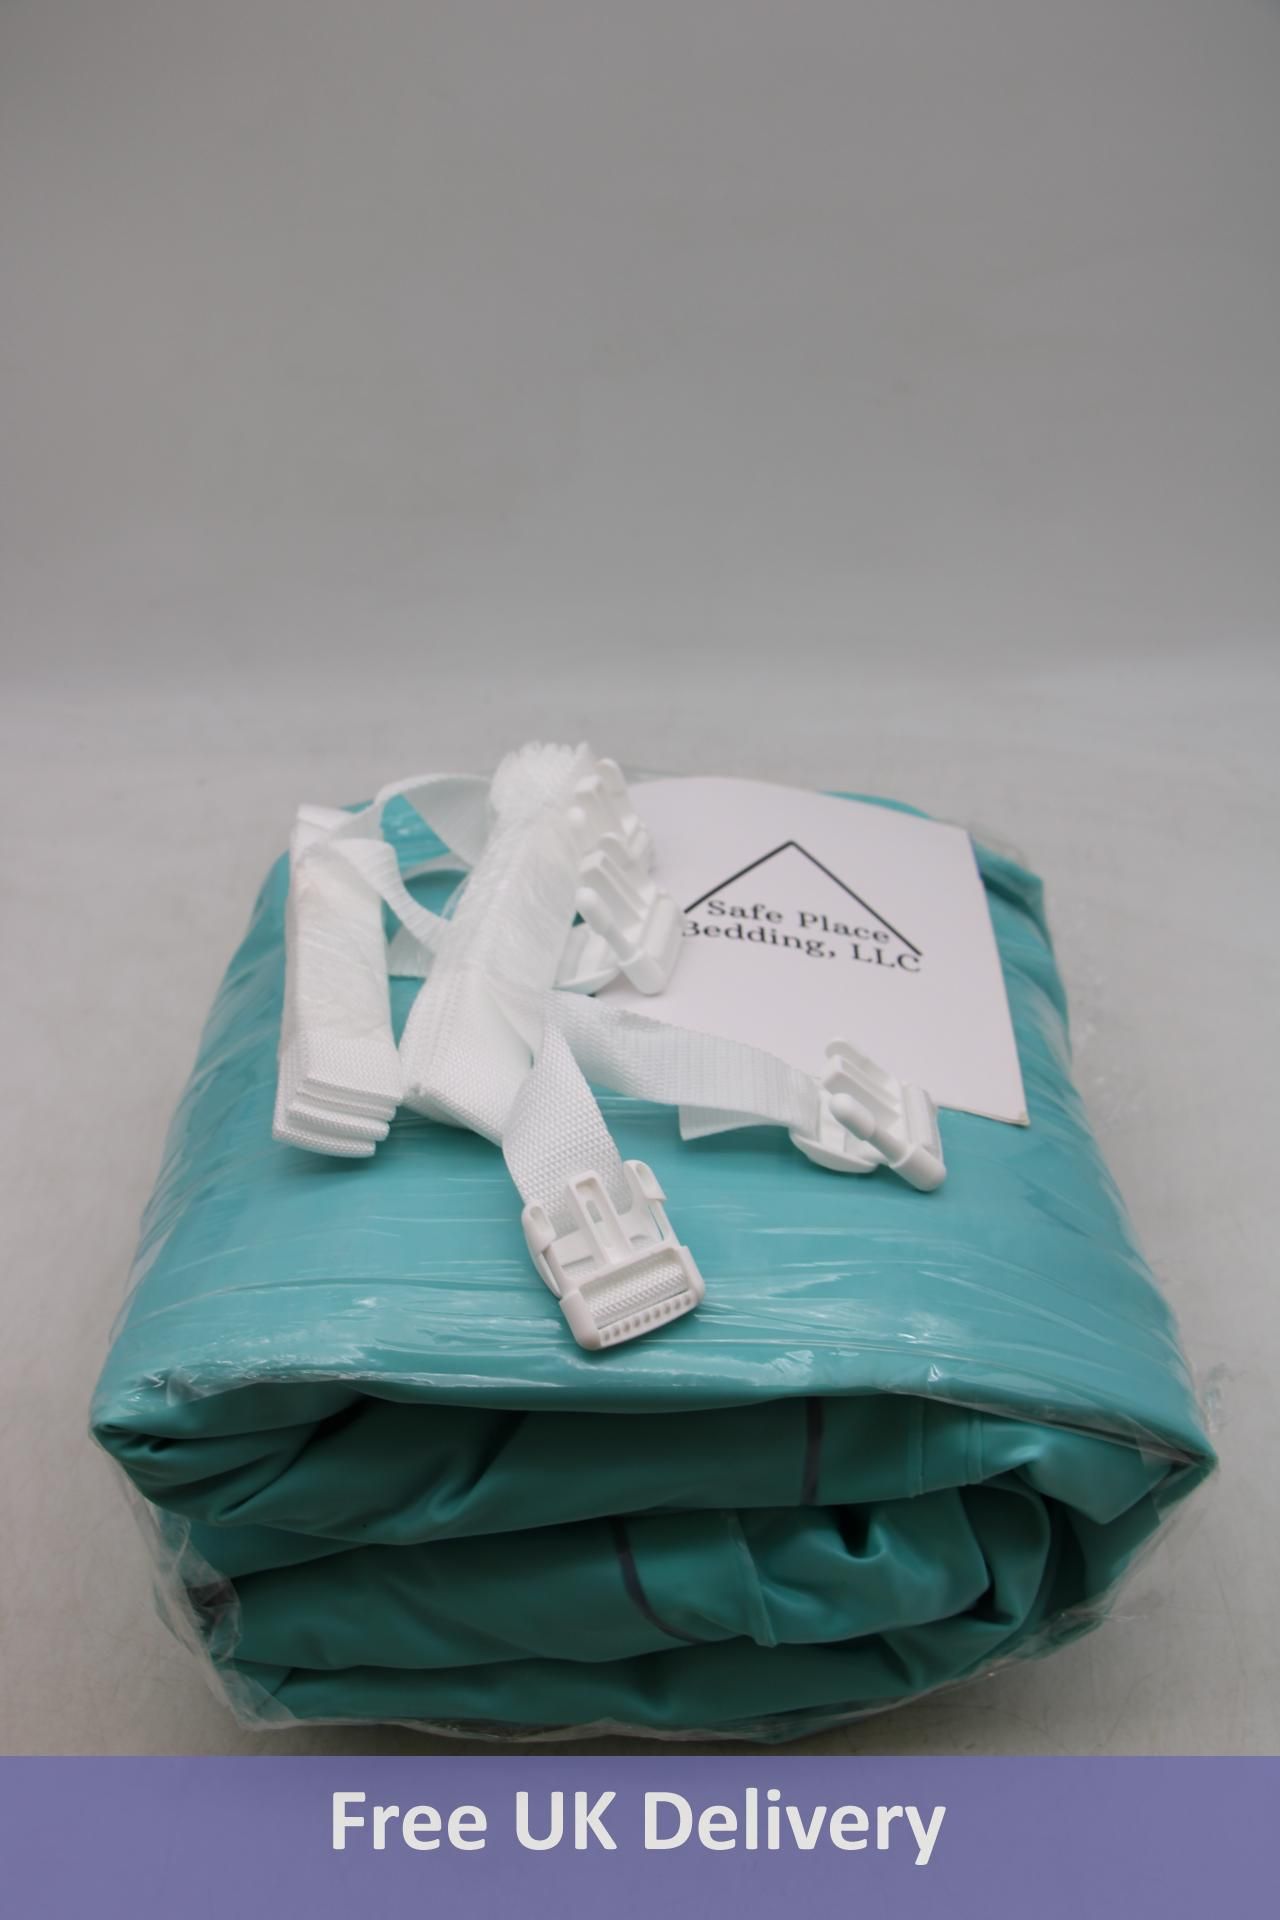 Safe Place Bedding Inflatable Travel Bed, Light Blue, Not Tested